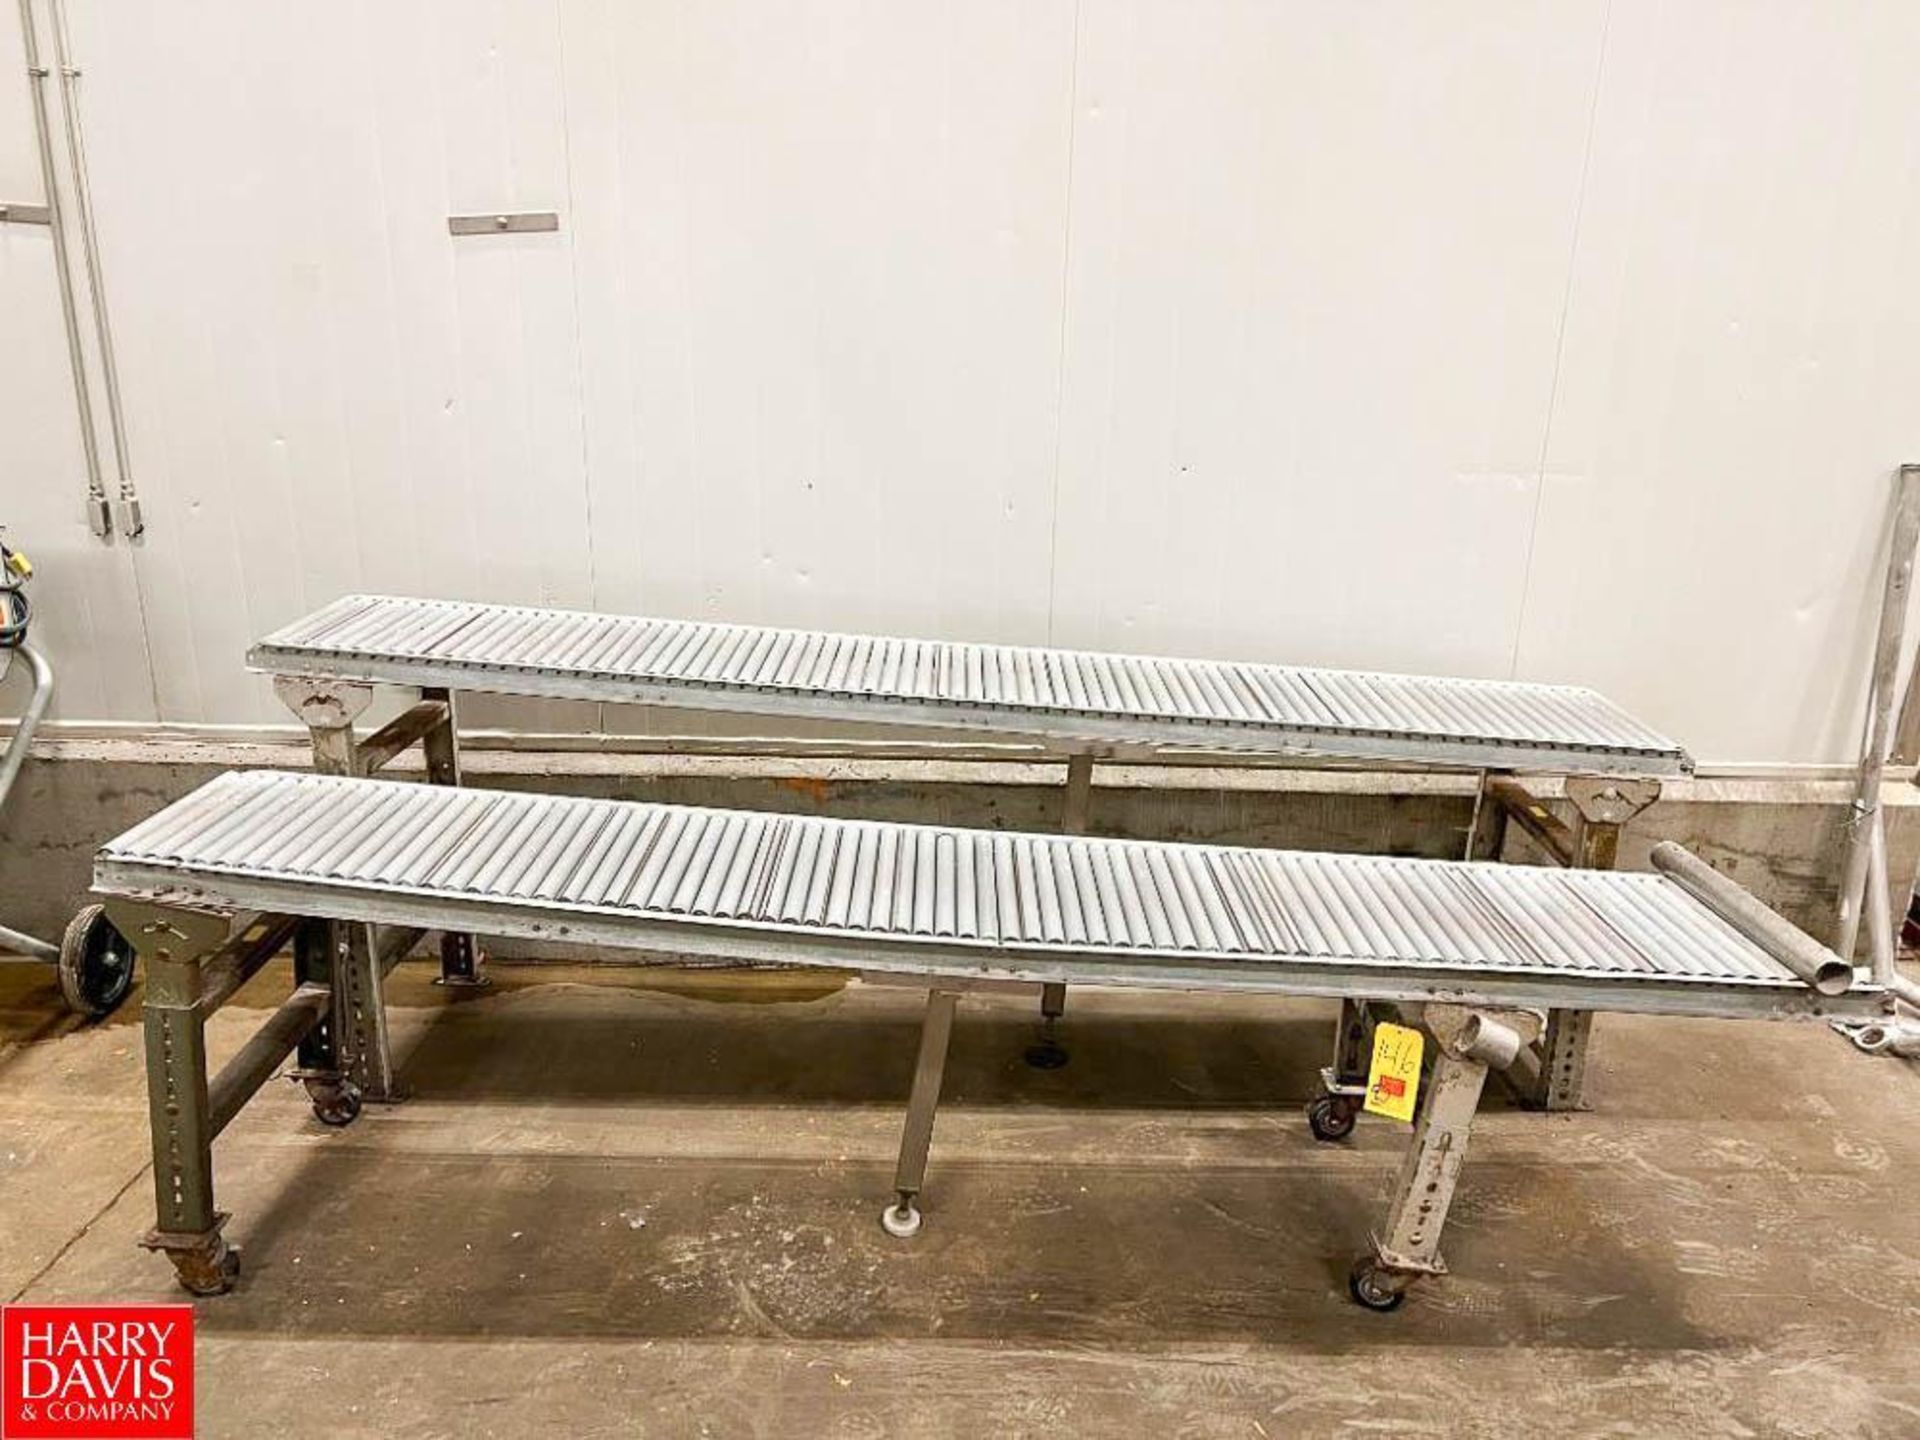 (2) Gravity Fed Roller Conveyor Sections, Dimensions = 10' x 18" - Rigging Fee: $75